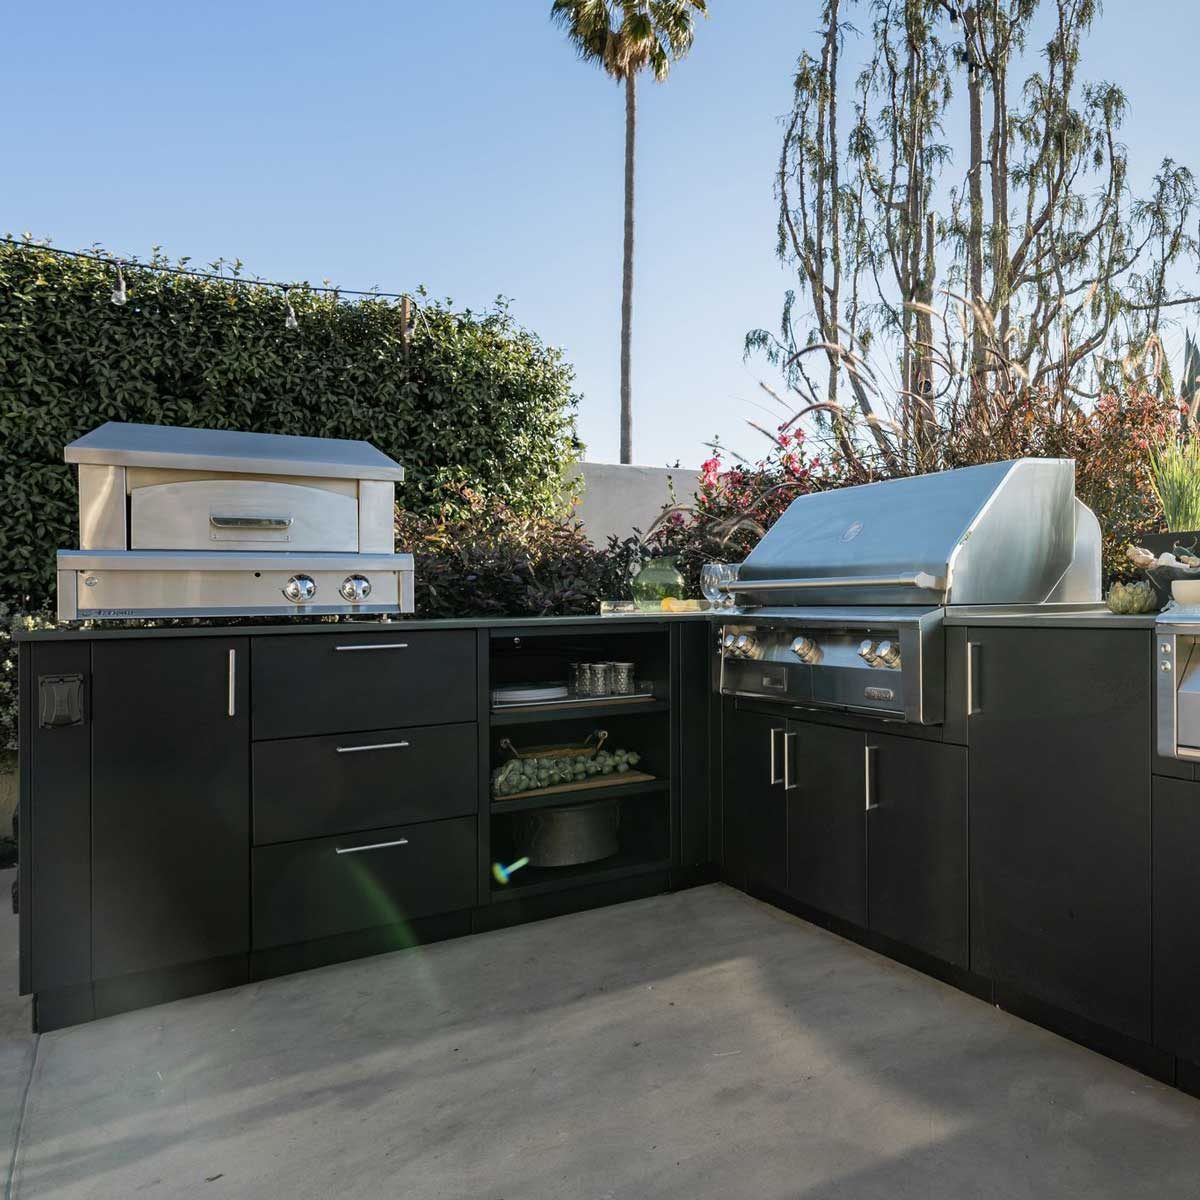 Outdoor Kitchen Components: 6 Must-Haves For A Perfect Island